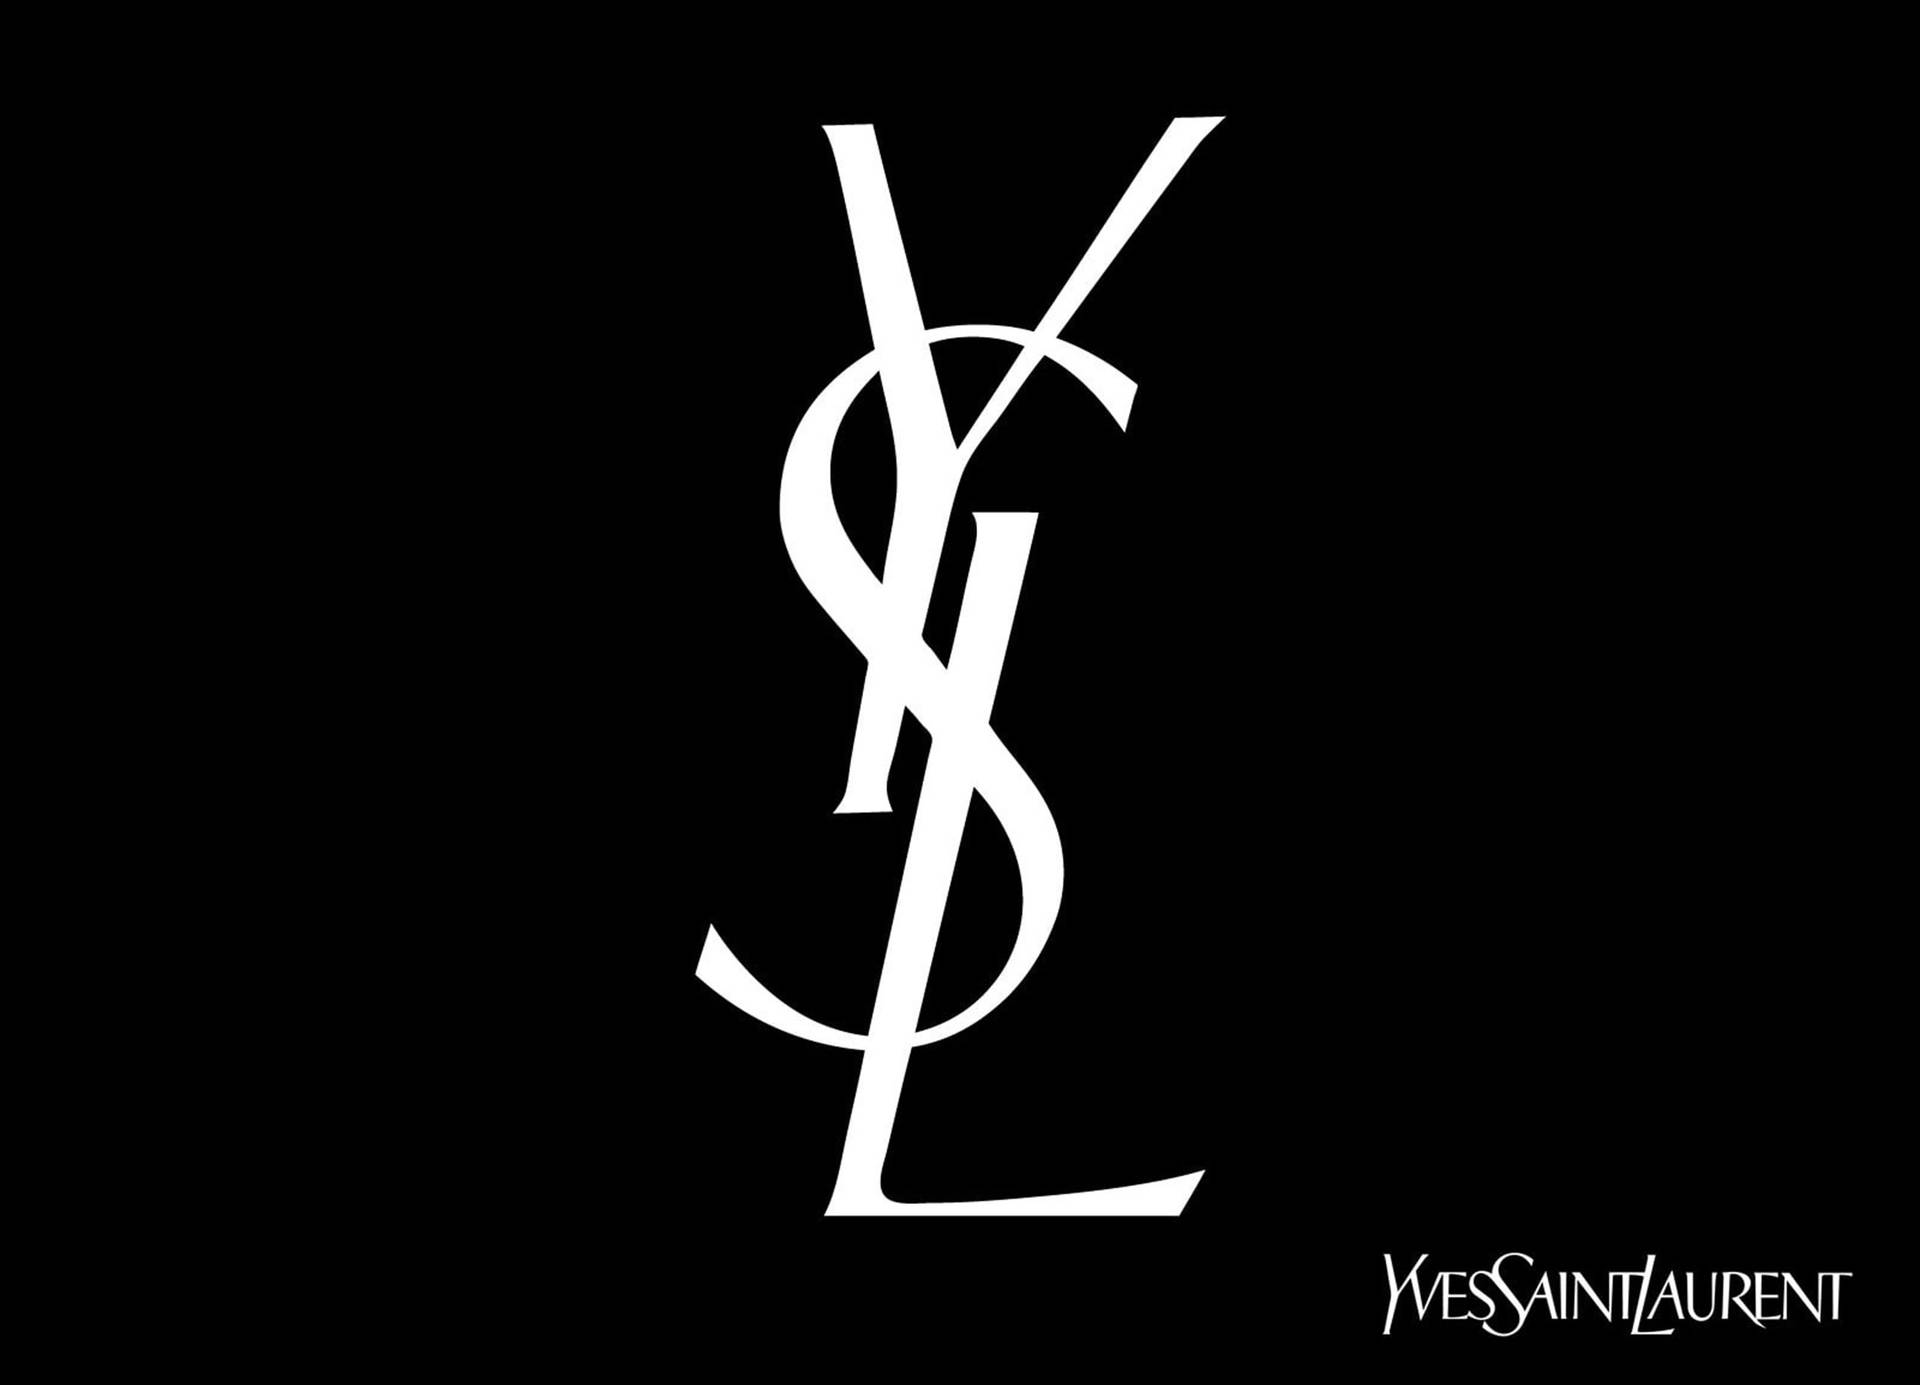 Ysl Pictures